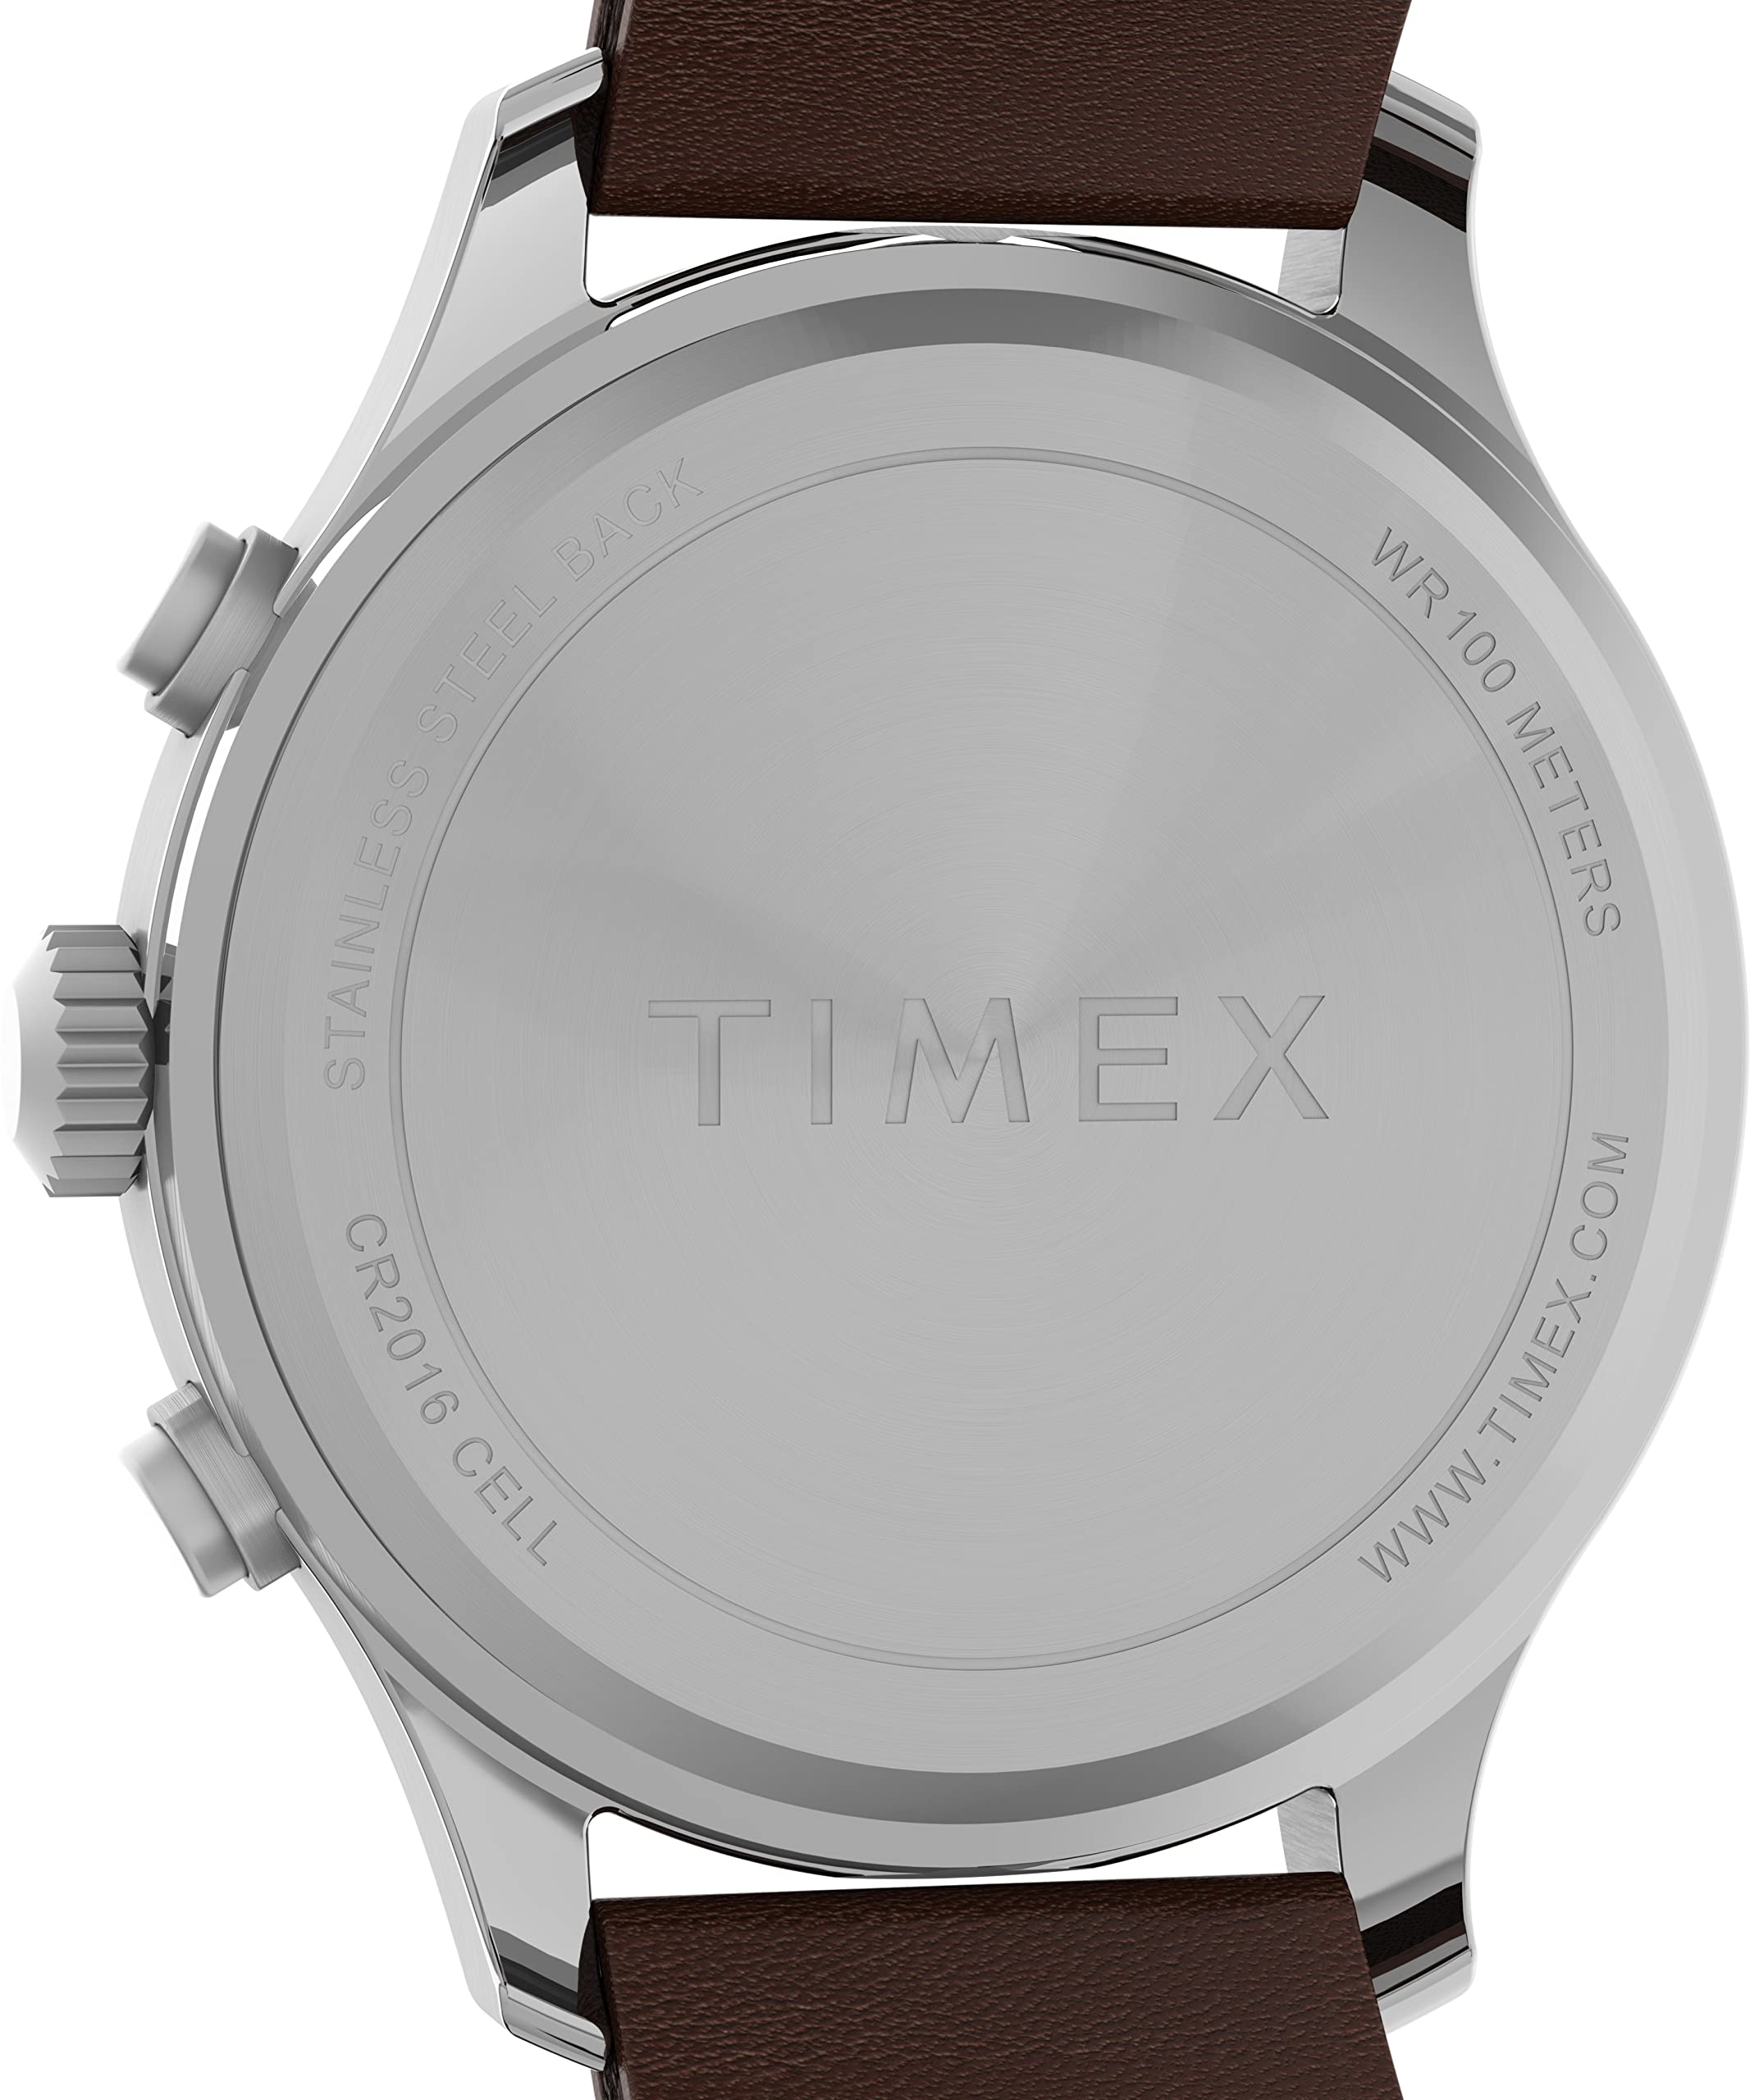 Timex Men's Expedition Field Chrono Watch